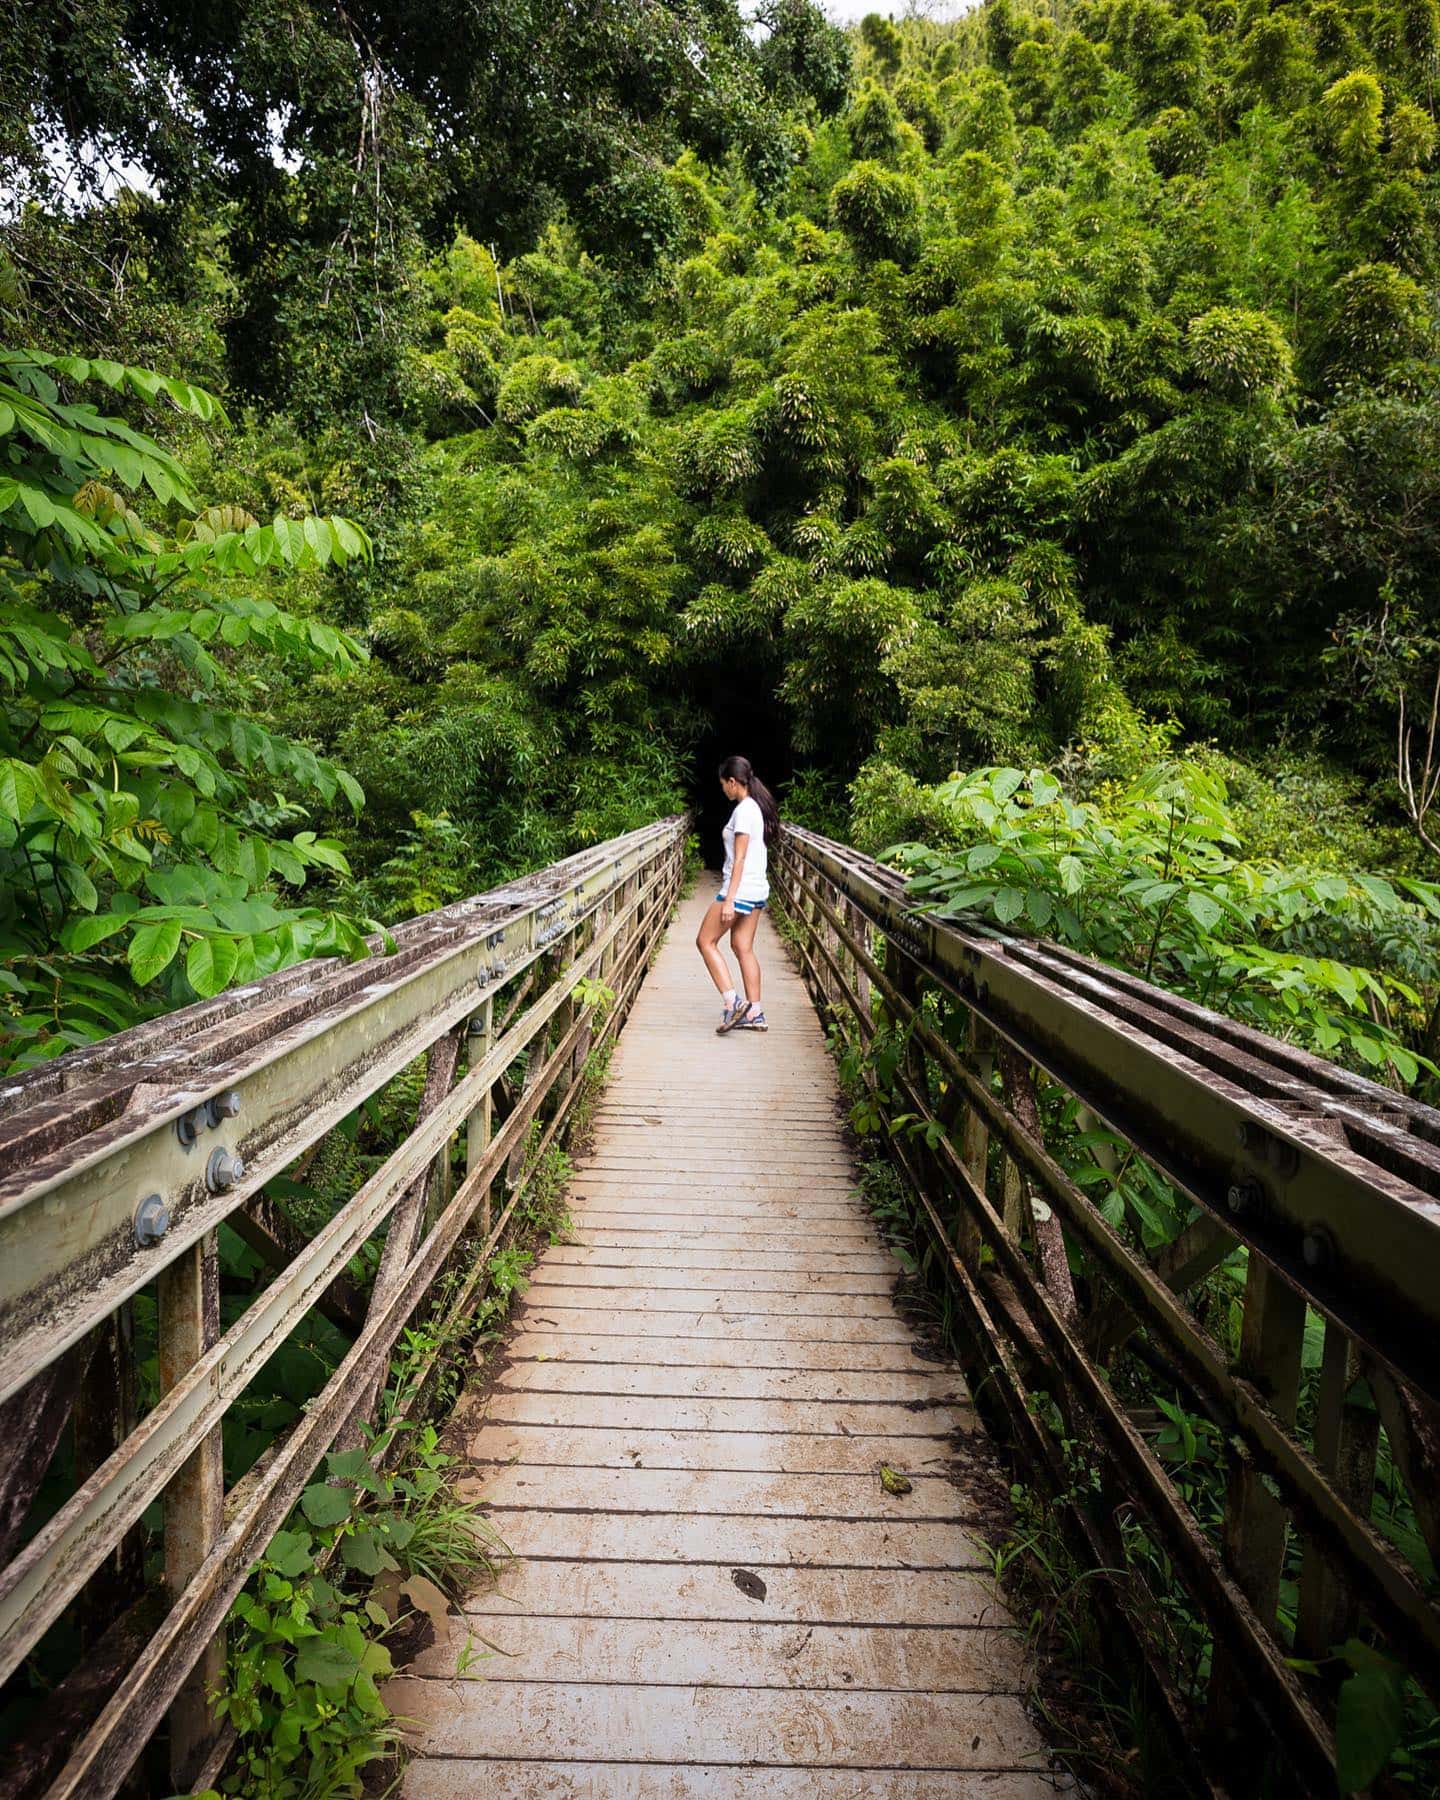 A muddy trek brought us to a bamboo forest, huge waterfalls, and some very cool bridges at the Haleakalā National Park.  Swipe 🎥 to see the videos! ❤️  This was during our trip to Hawaii last year in December.  #hawaiitravel #nationalpark #adventuretravel #letsexplore #waterfallphotography #hawaiianislands #hawaiilove #hawaiitrip